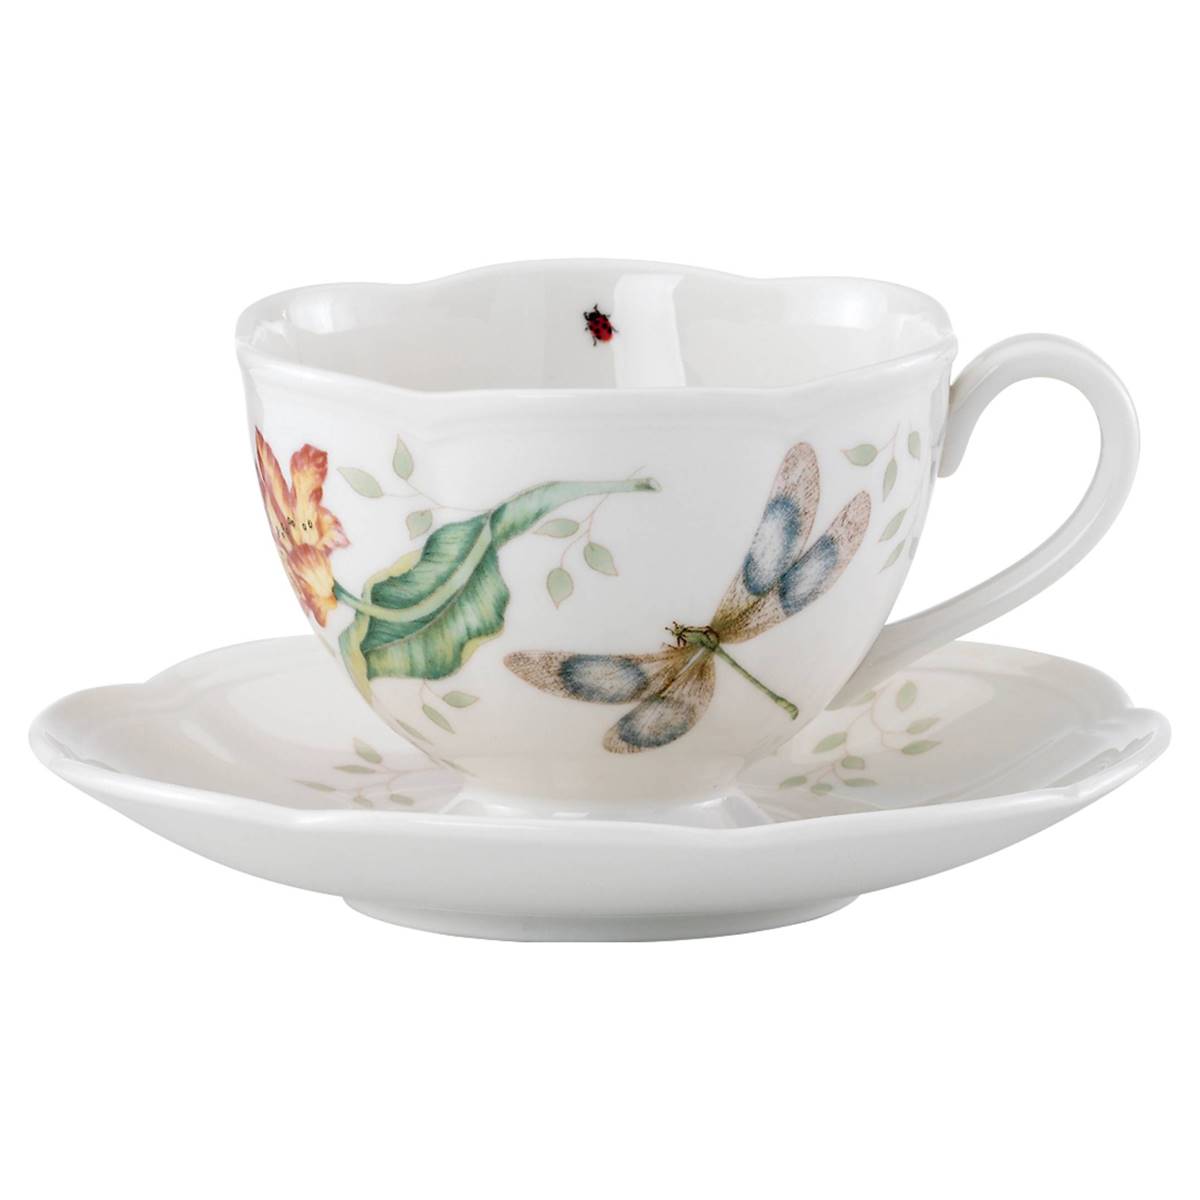 Lenox(R) Butterfly Meadow(R) Dragonfly Cup & Saucer